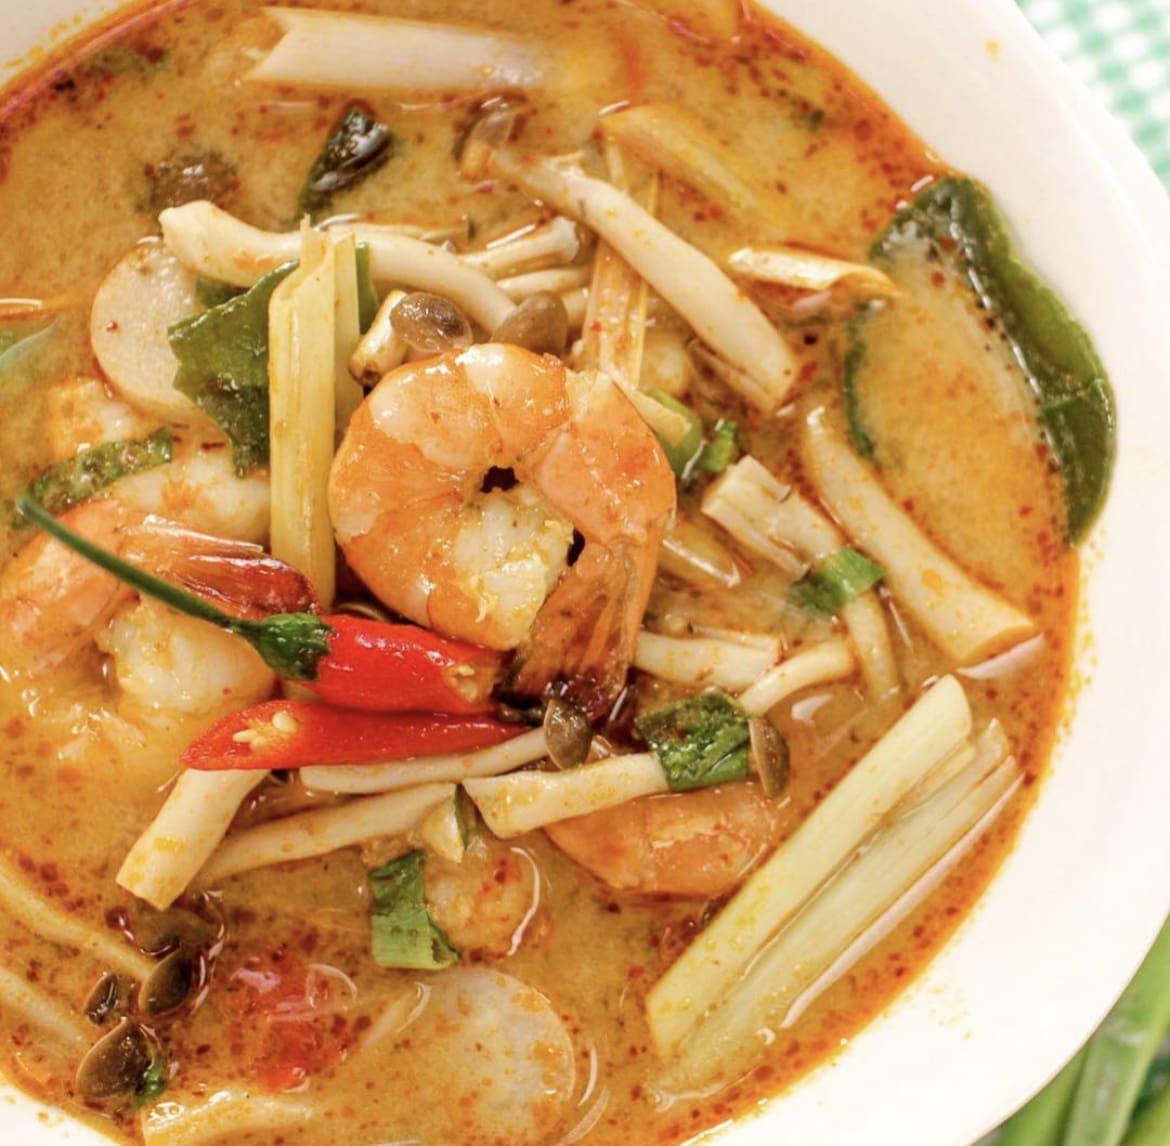 Tom Yum Goong - Experience The Best Traditional Thai Food in Thailand